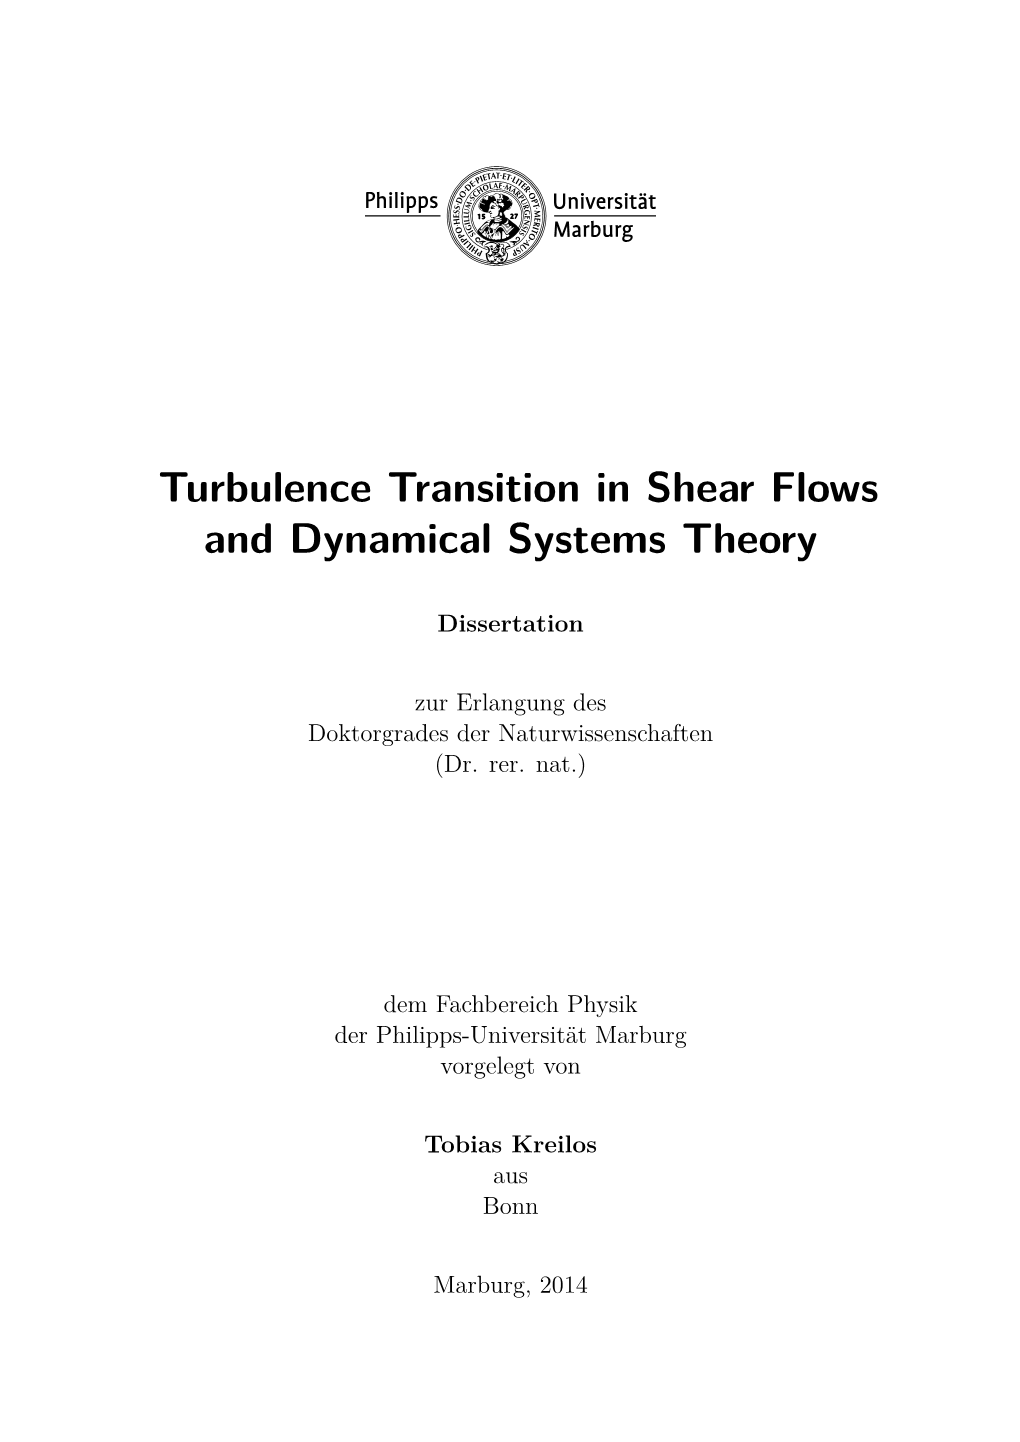 Turbulence Transition in Shear Flows and Dynamical Systems Theory